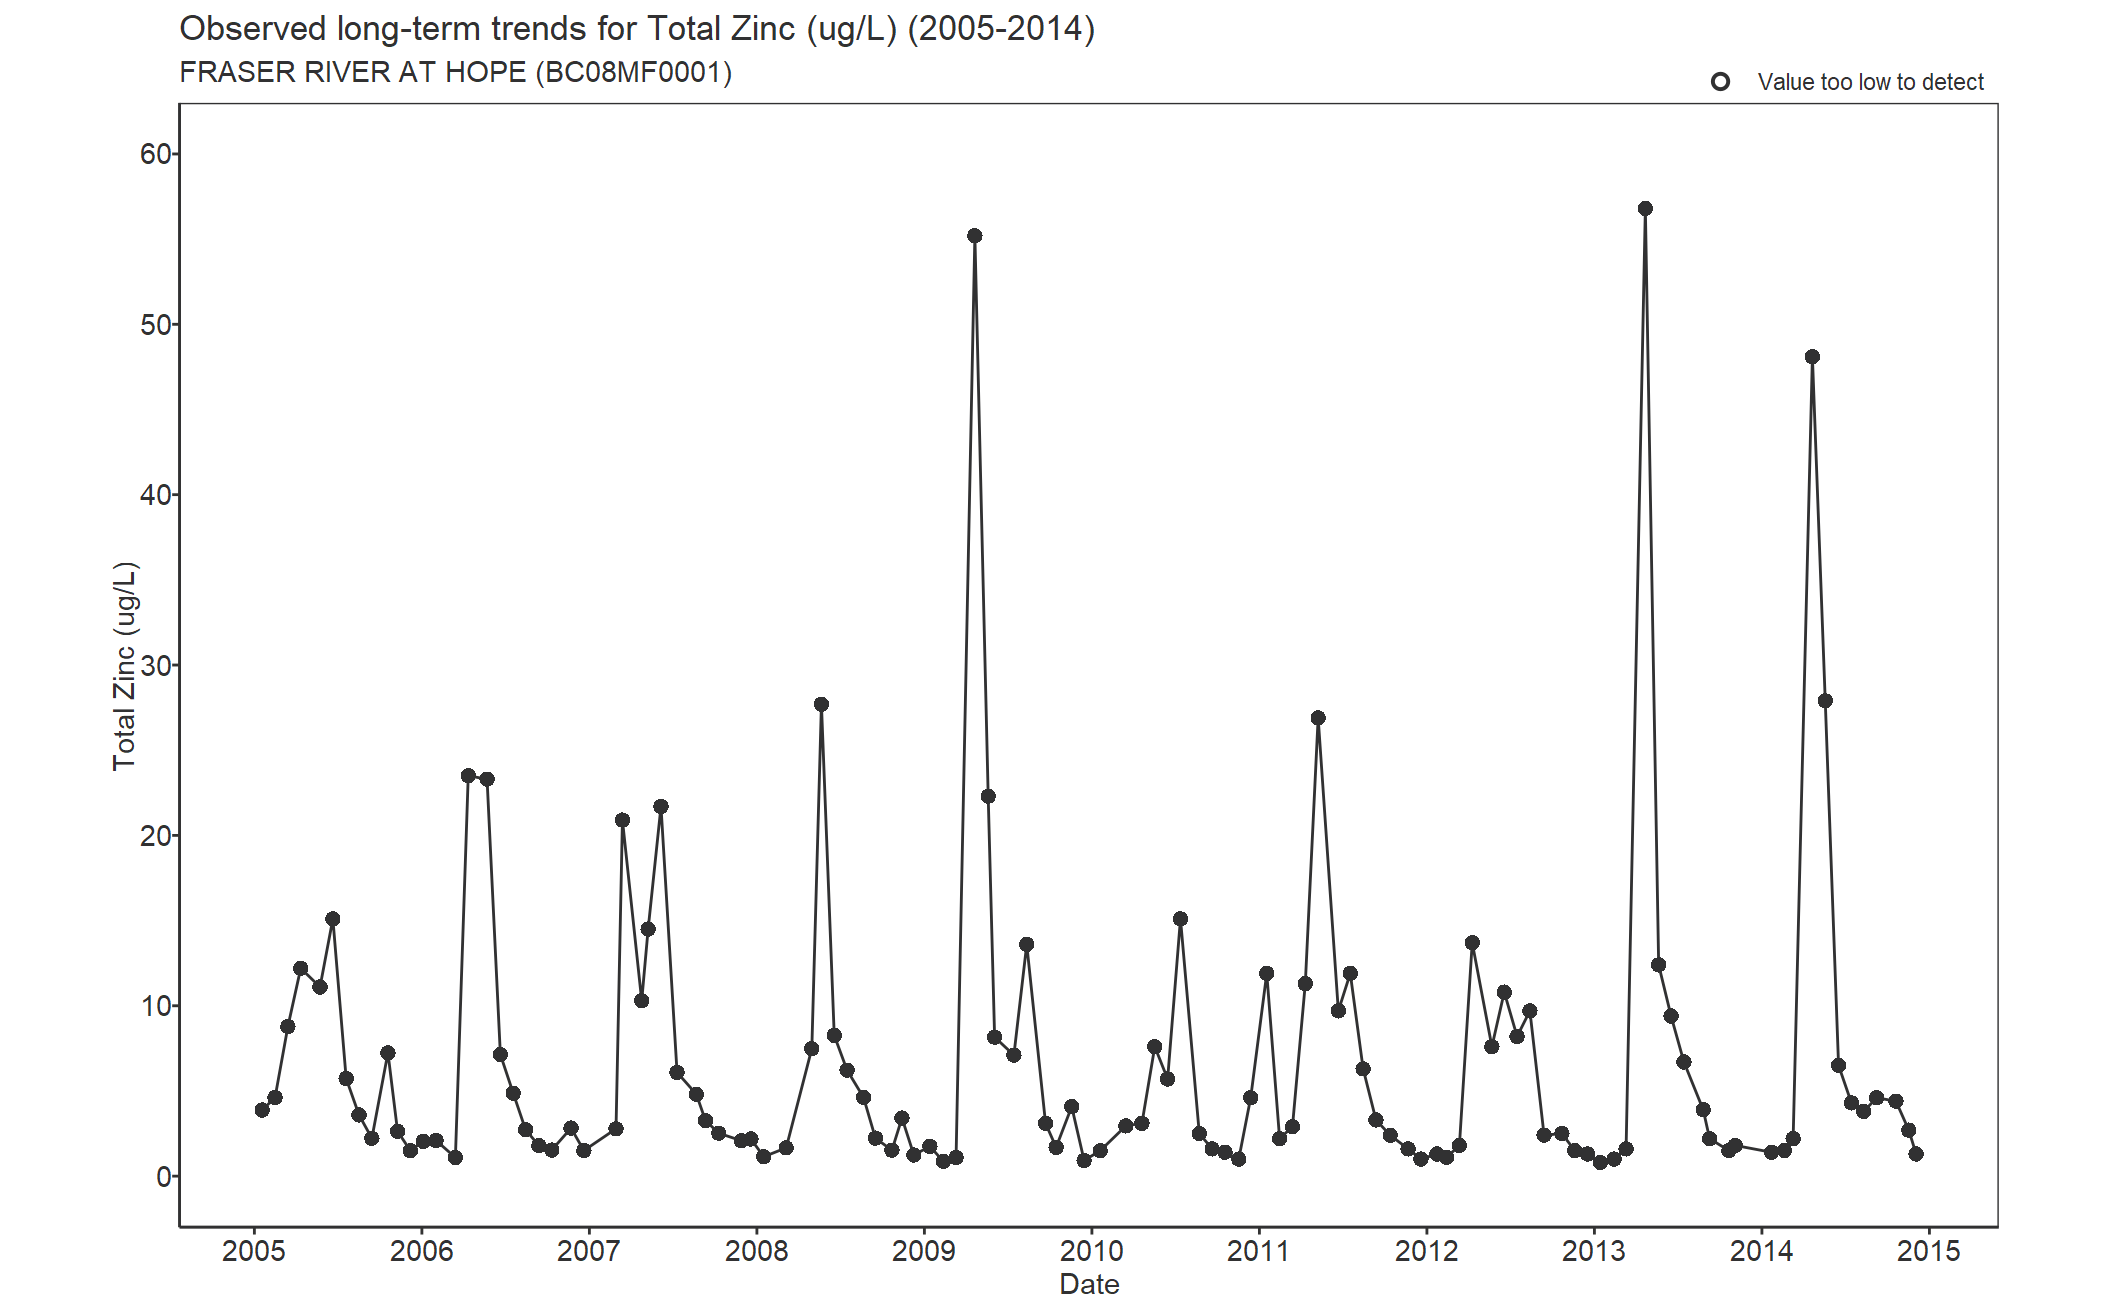 Observed long-term trends for Zinc Total (2005-2014)